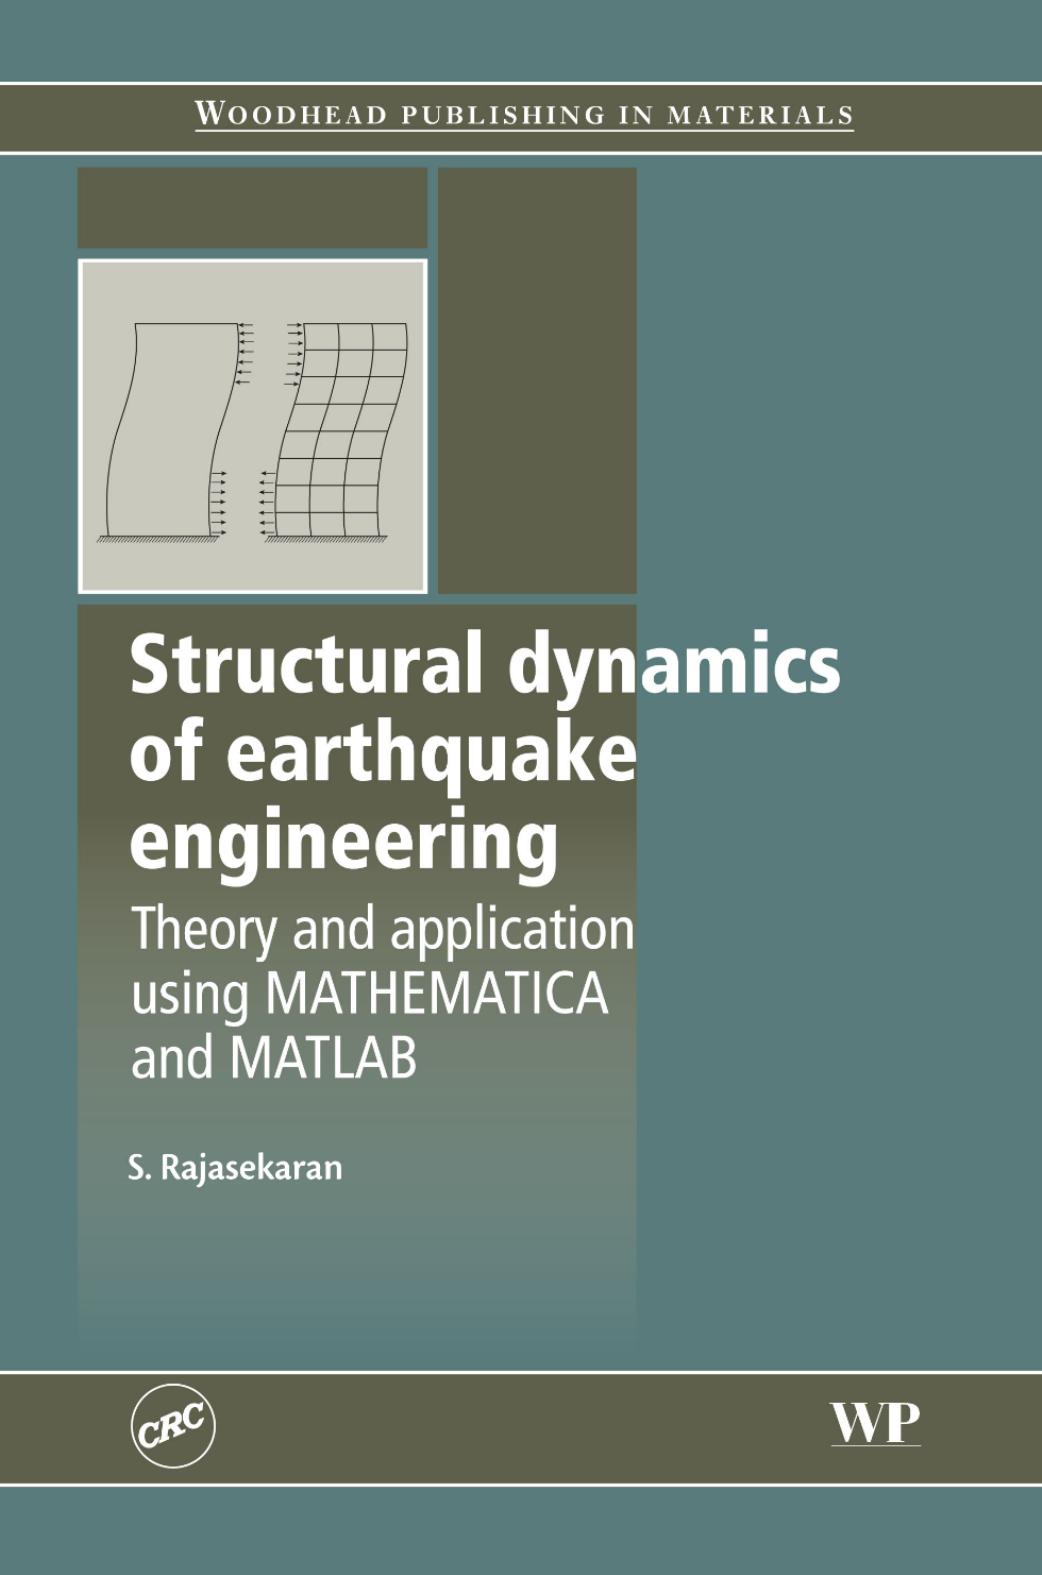 Structural Dynamics of Earthquake Engineering: Theory and Application Using Mathematica® and MATLAB®